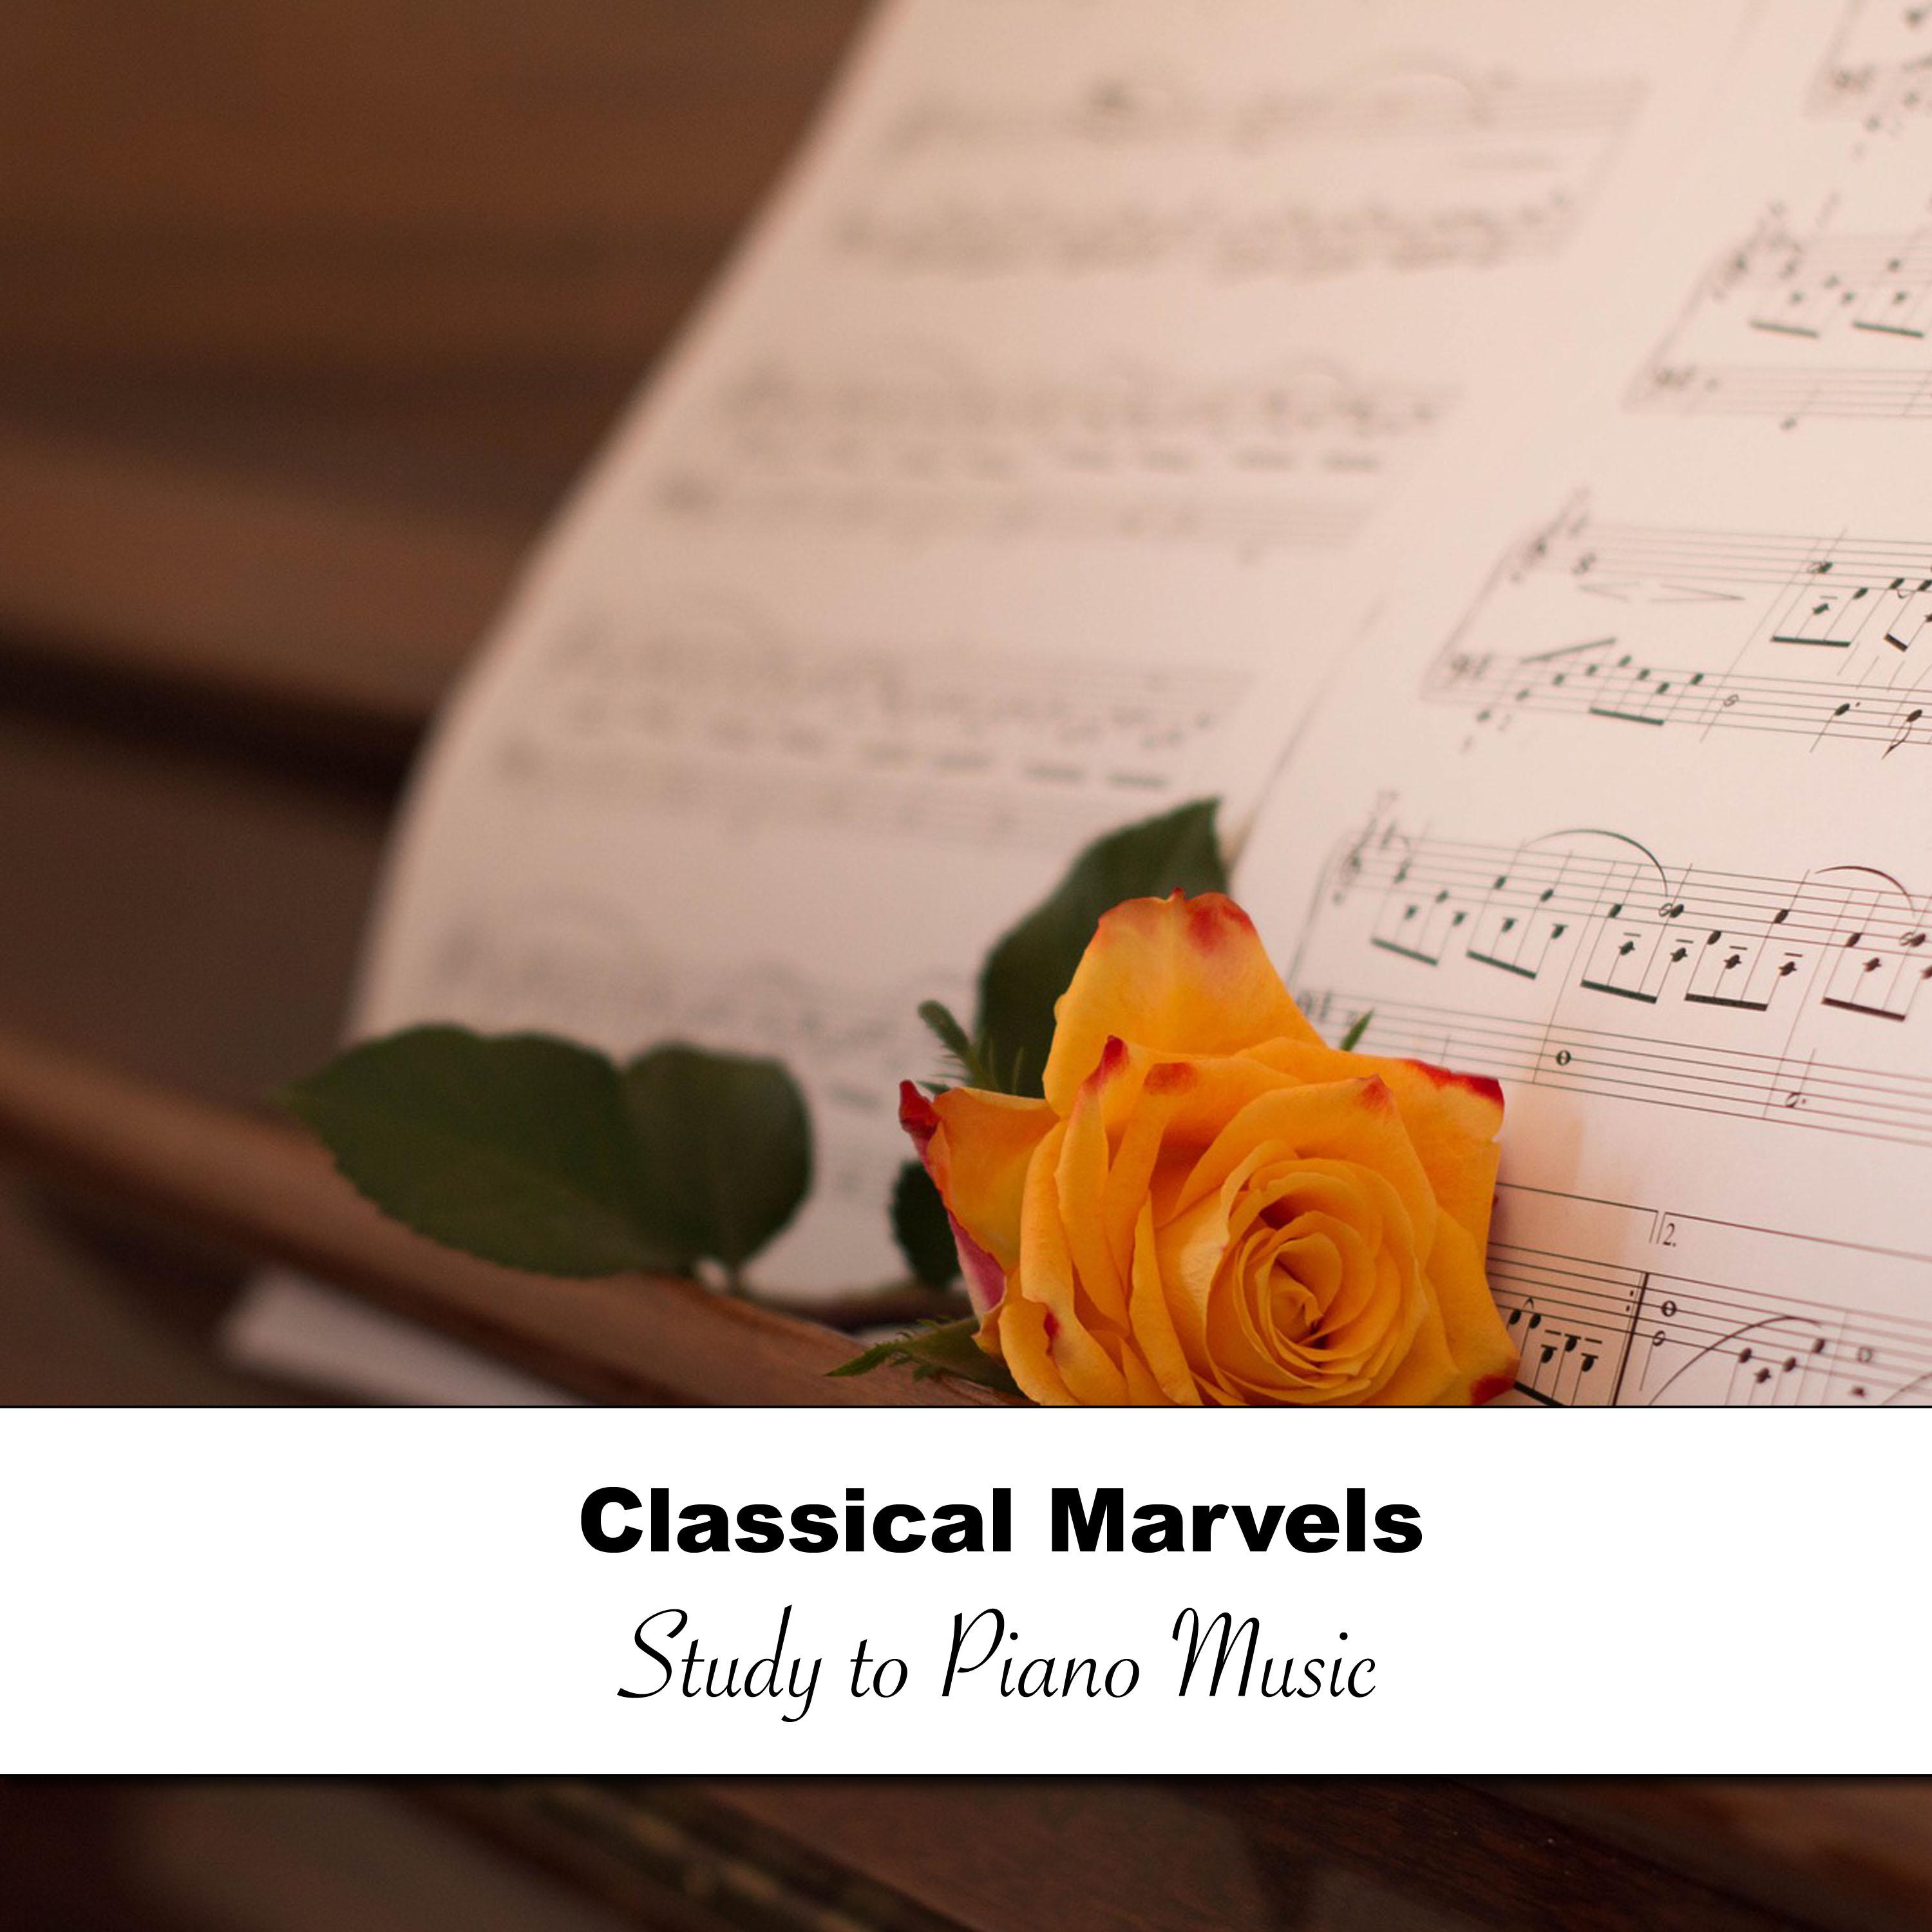 11 Classical Marvels: Study to Piano Music